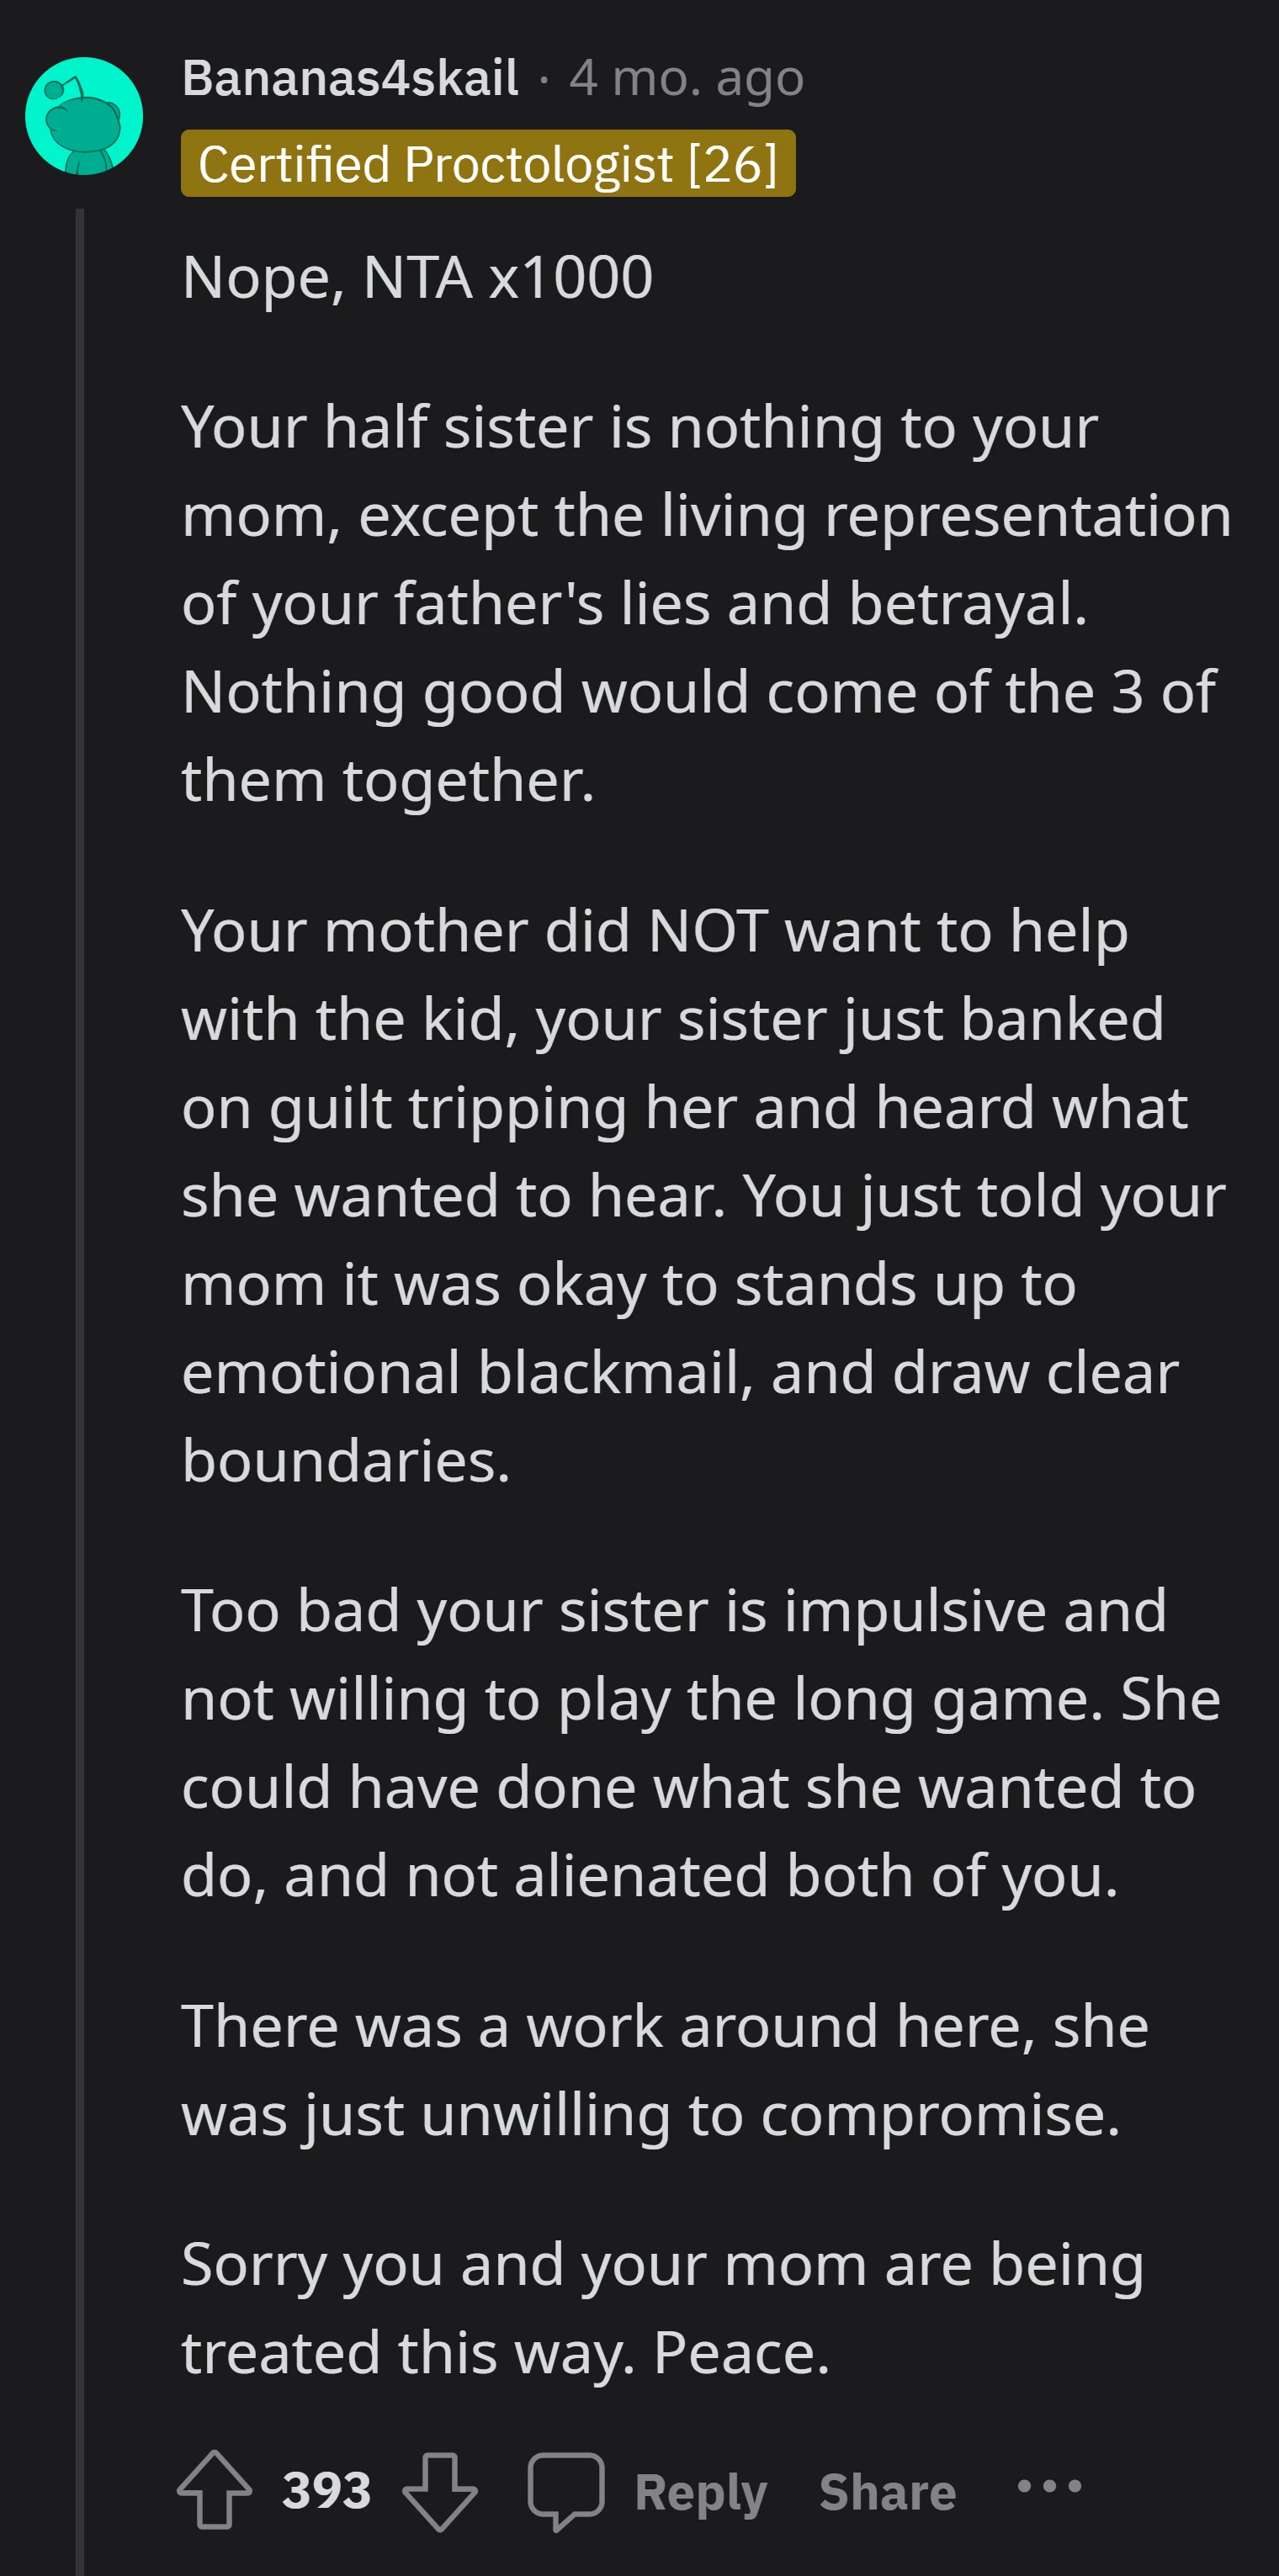 Redditor believes OP's mom shouldn't be guilt-tripped into helping